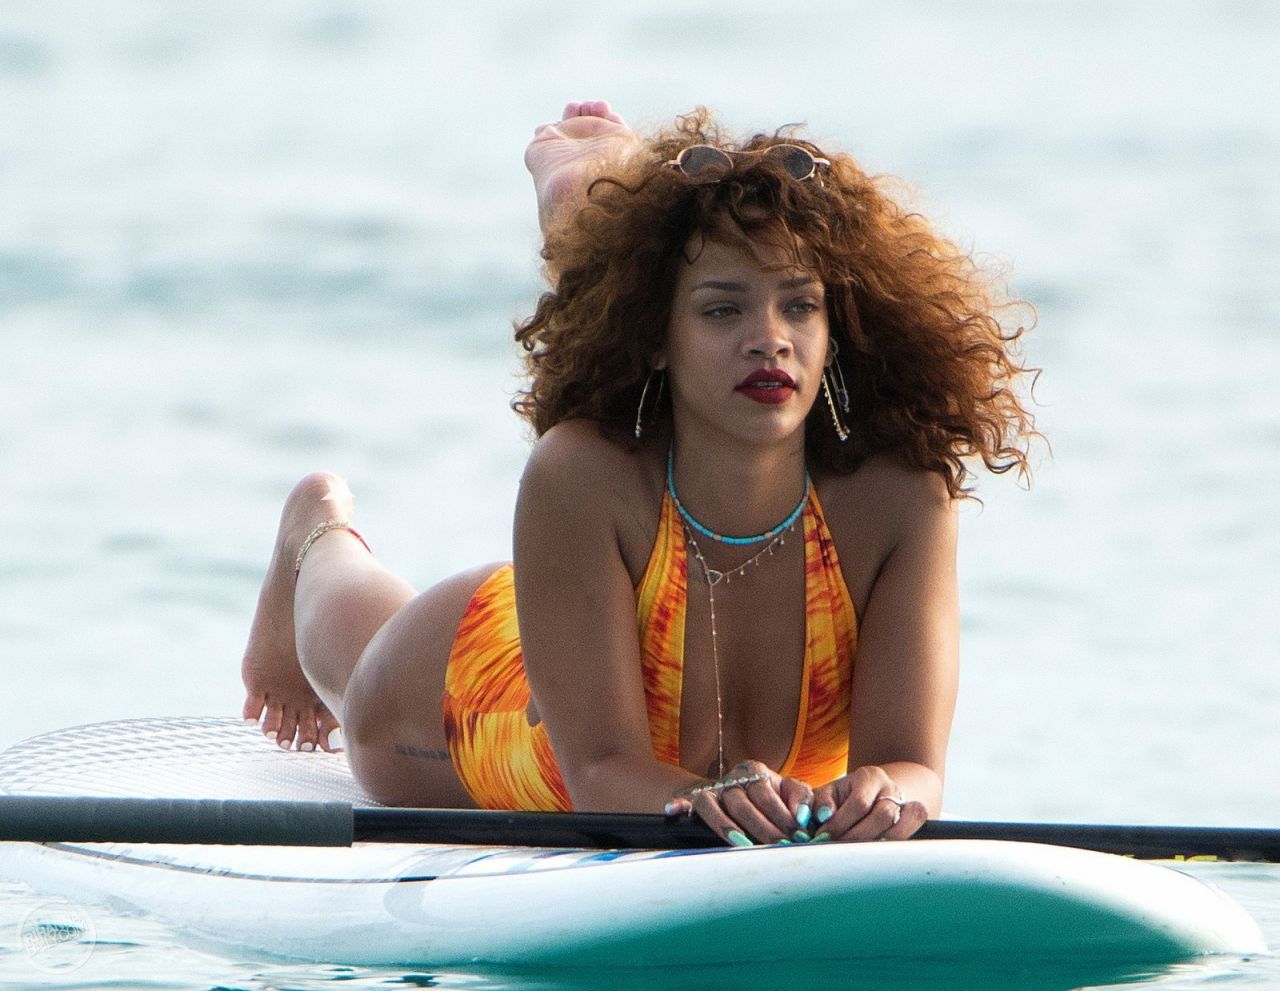 Rihanna Paddle Boating in a Swimsuit in Barbados, August 2015.